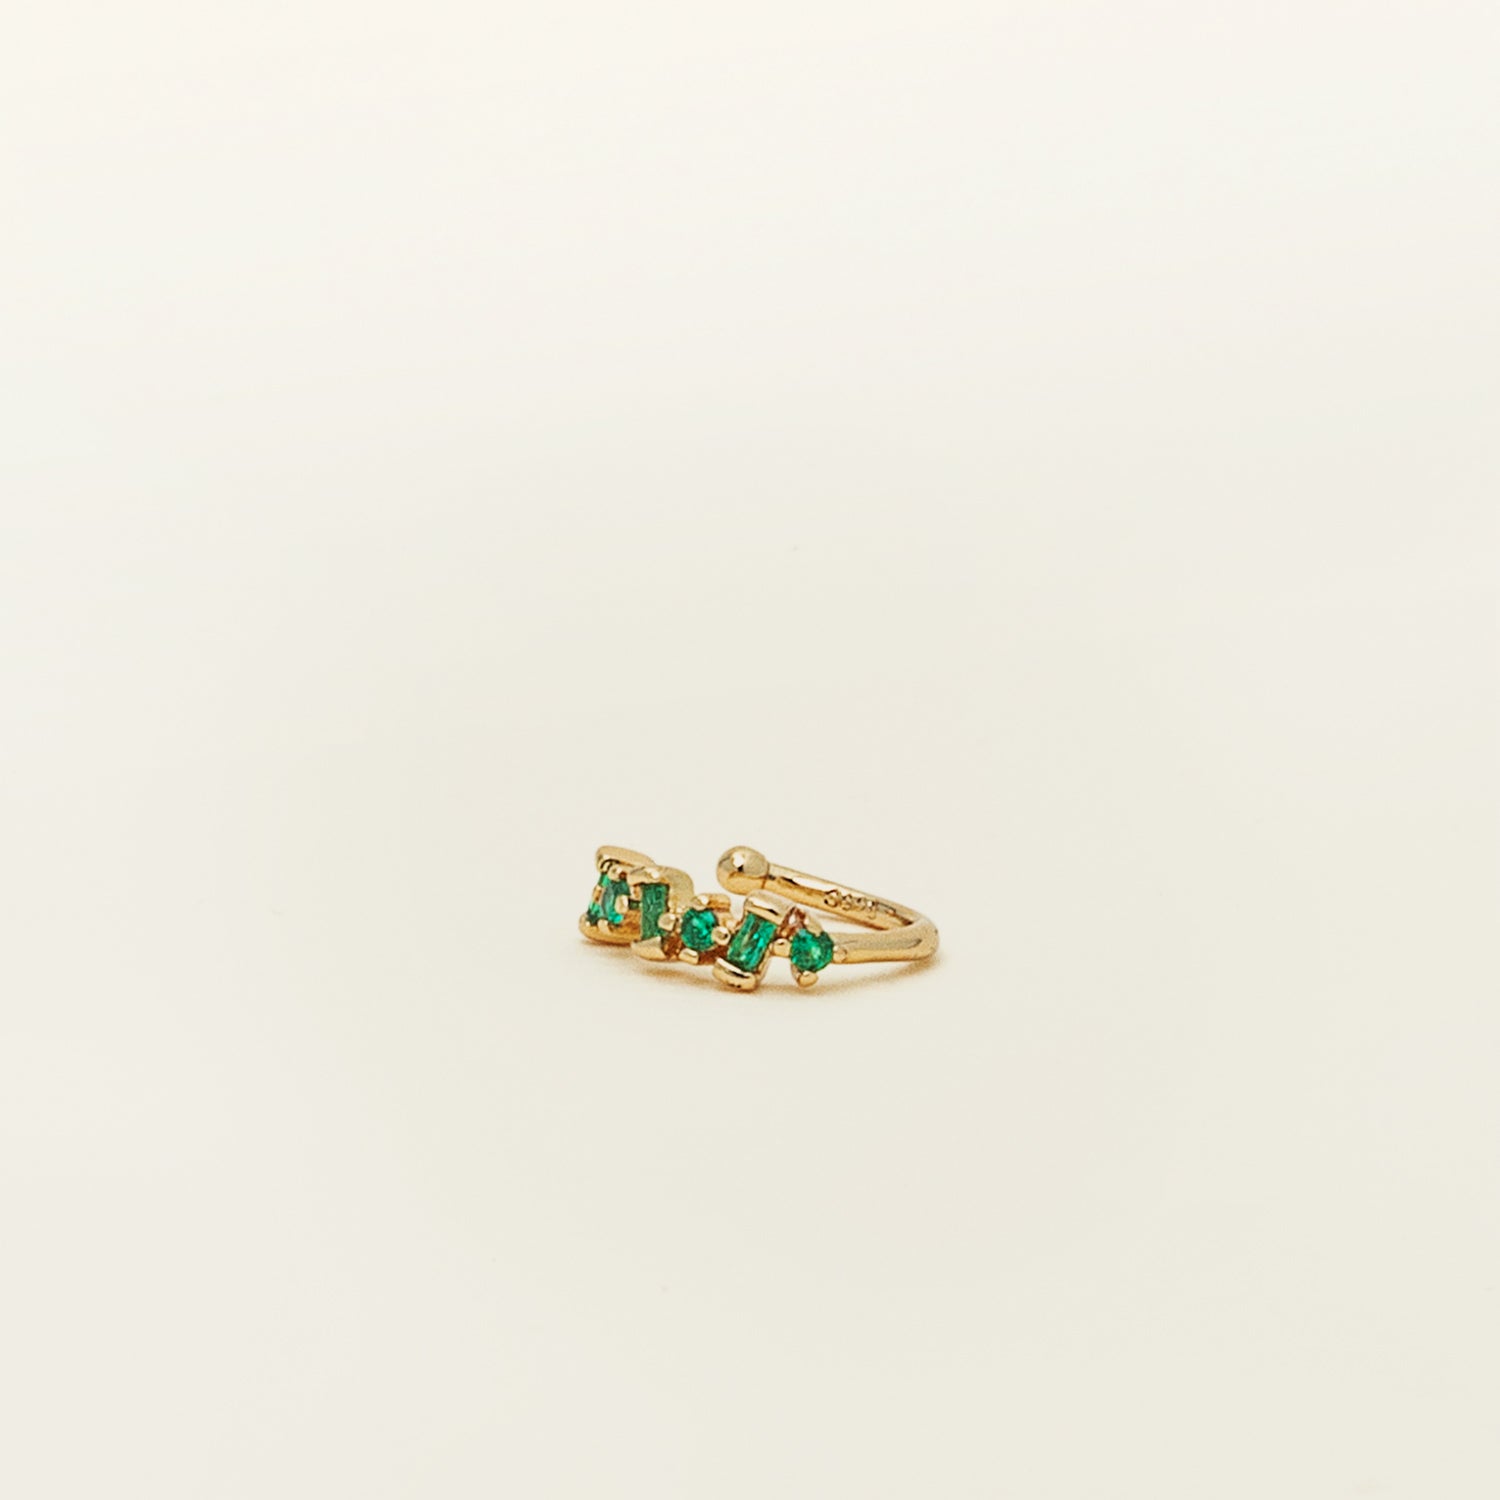 Catalogue image of the modern Emerald Green Pavé Cluster Ear Cuff. Featuring a 925 Sterling Silver gold toned finish and a variety of Cubic Zirconia gemstone colors, this unique ear cuff will add a touch of sophistication to any outfit.